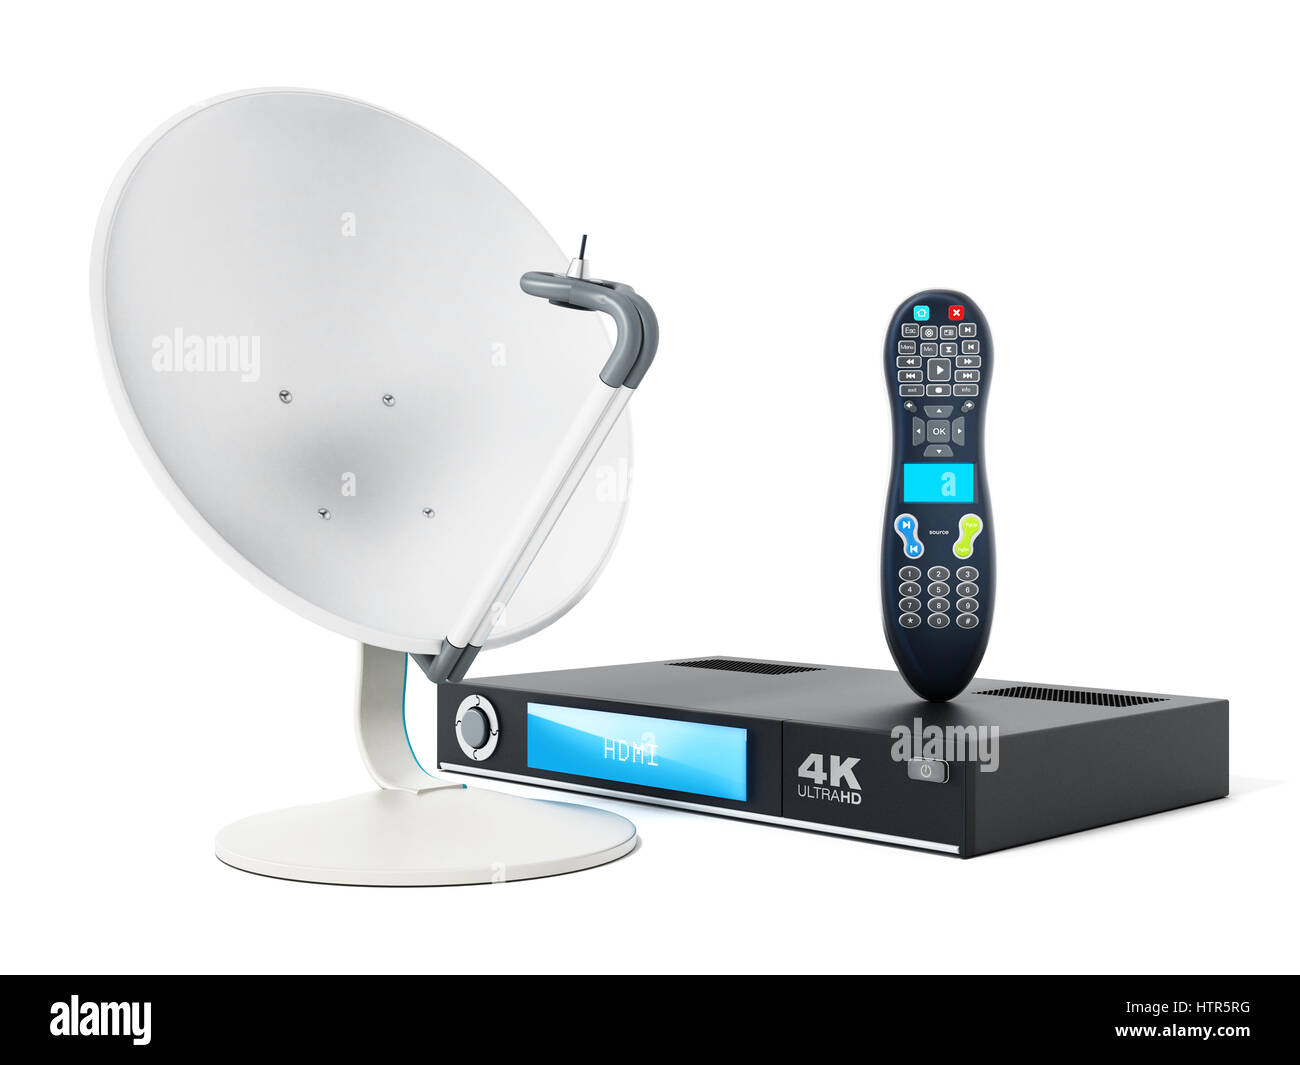 Satellite dish, 4K ultra HD receiver, remote controller isolated on white background. 3D illustration. Stock Photo